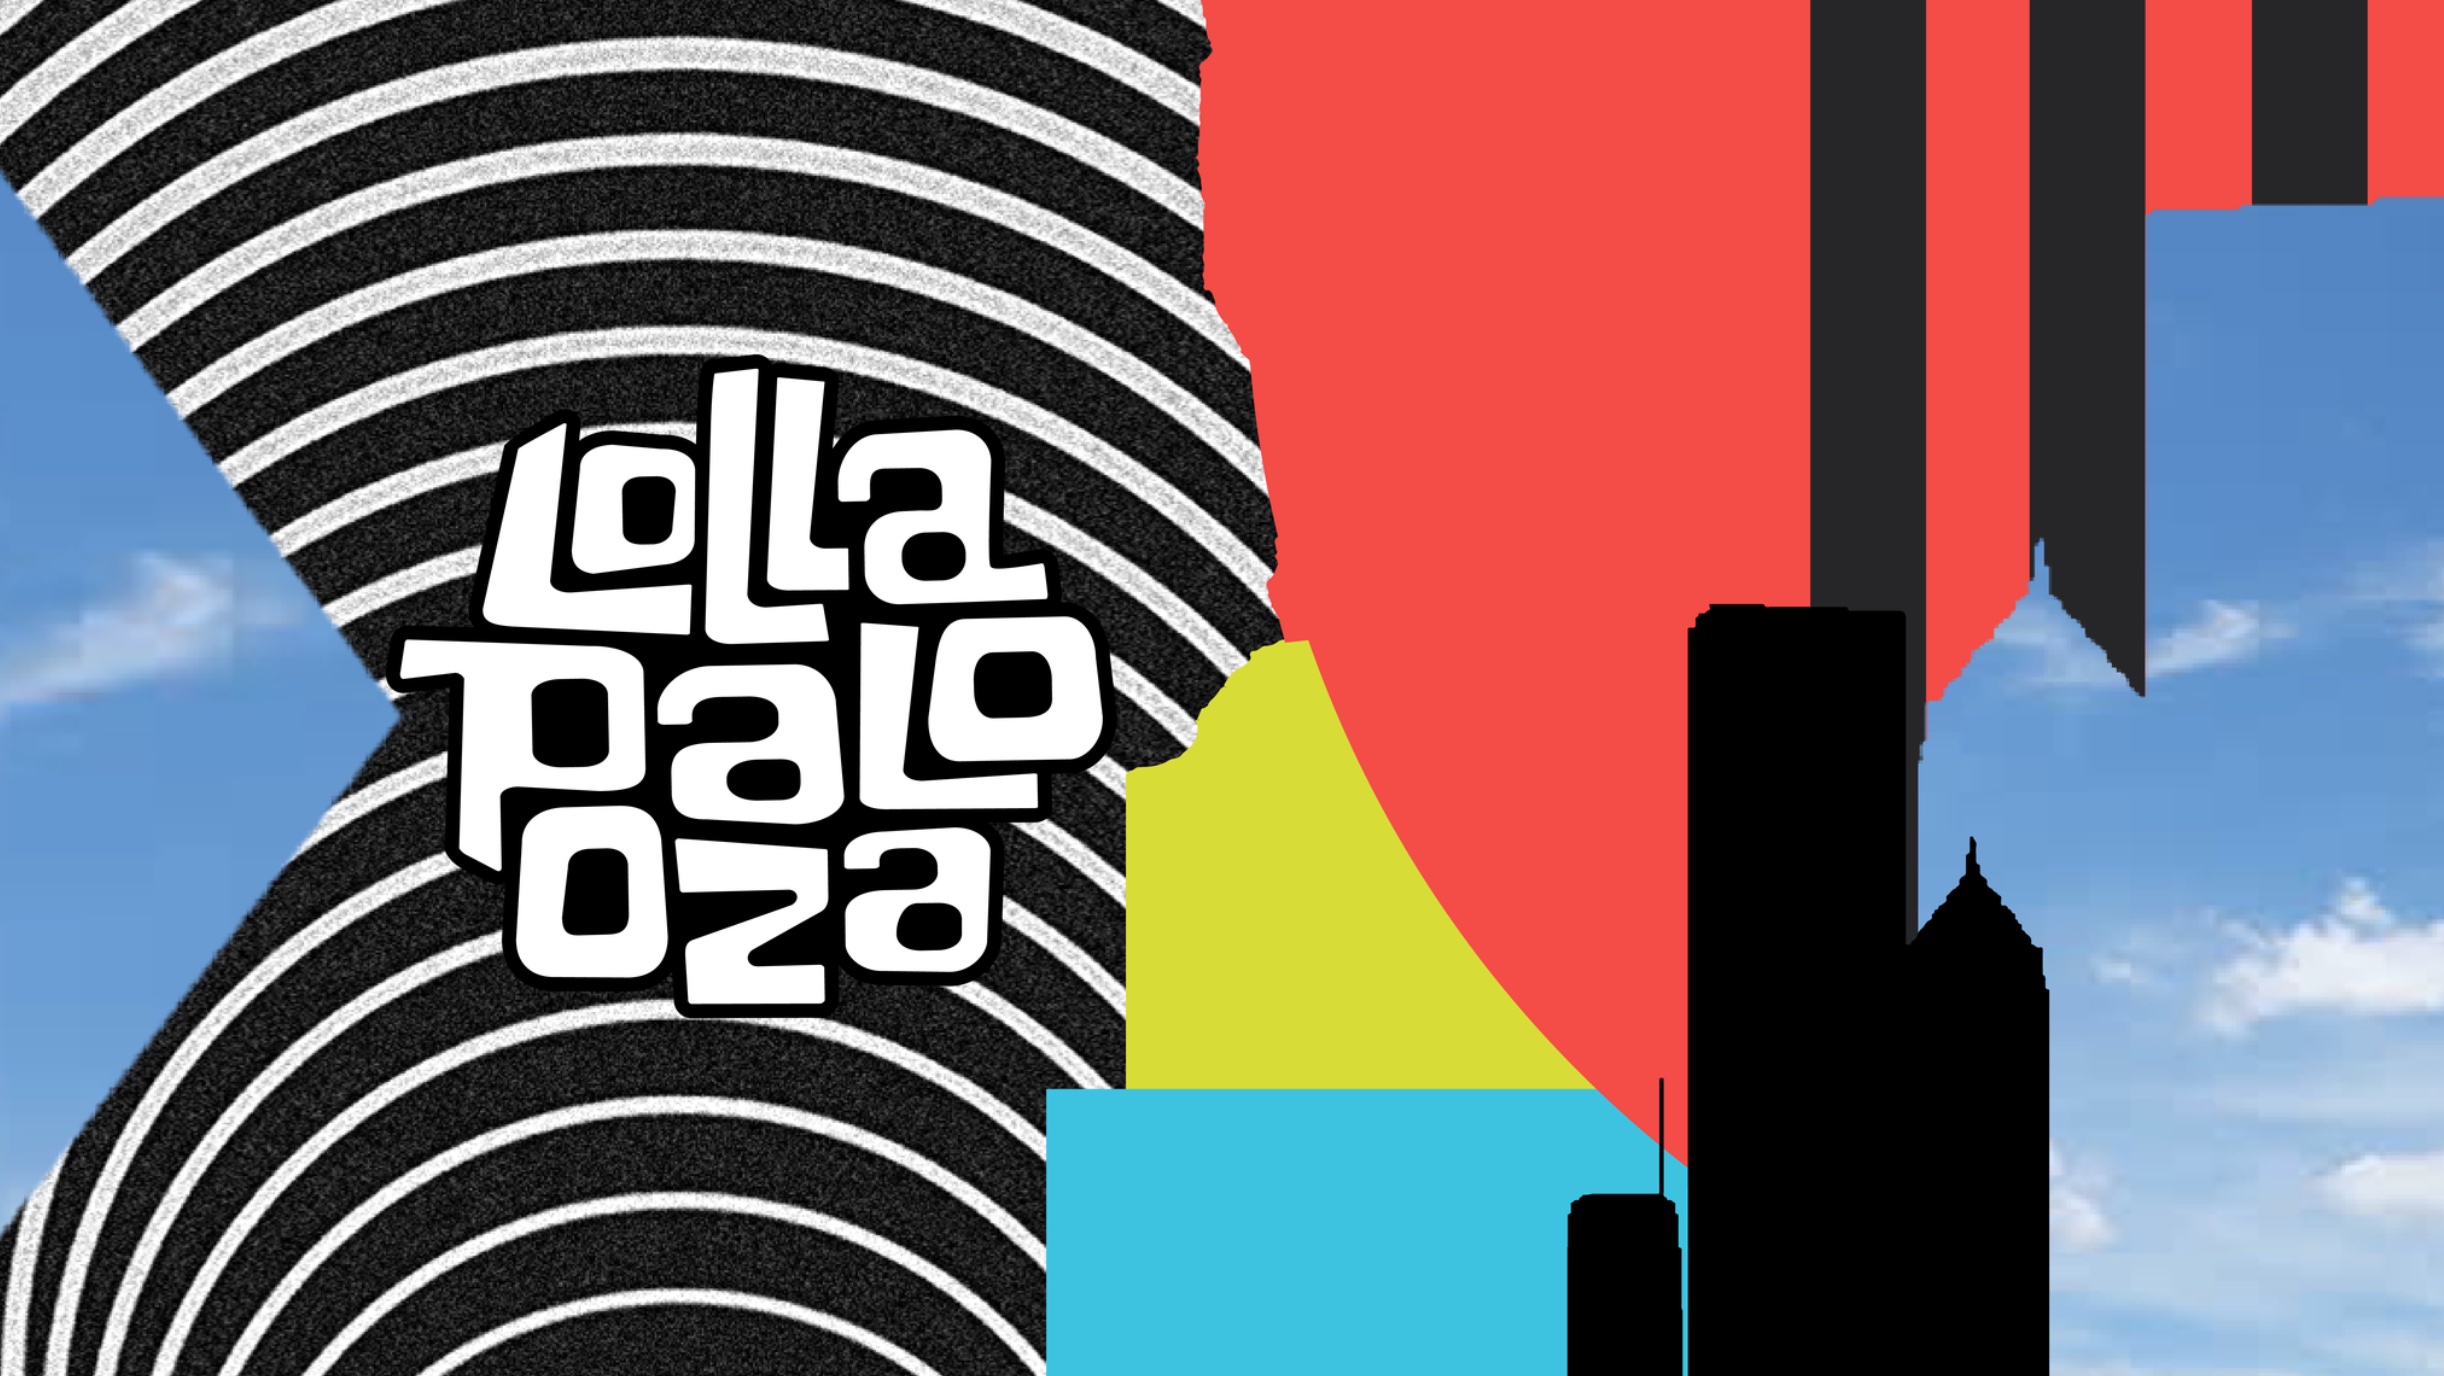 LOLLAPALOOZA ANNOUNCES LINEUP BY DAY & 1-DAY TICKETS AND 2-DAY BUNDLES ON SALE THIS WEDNESDAY